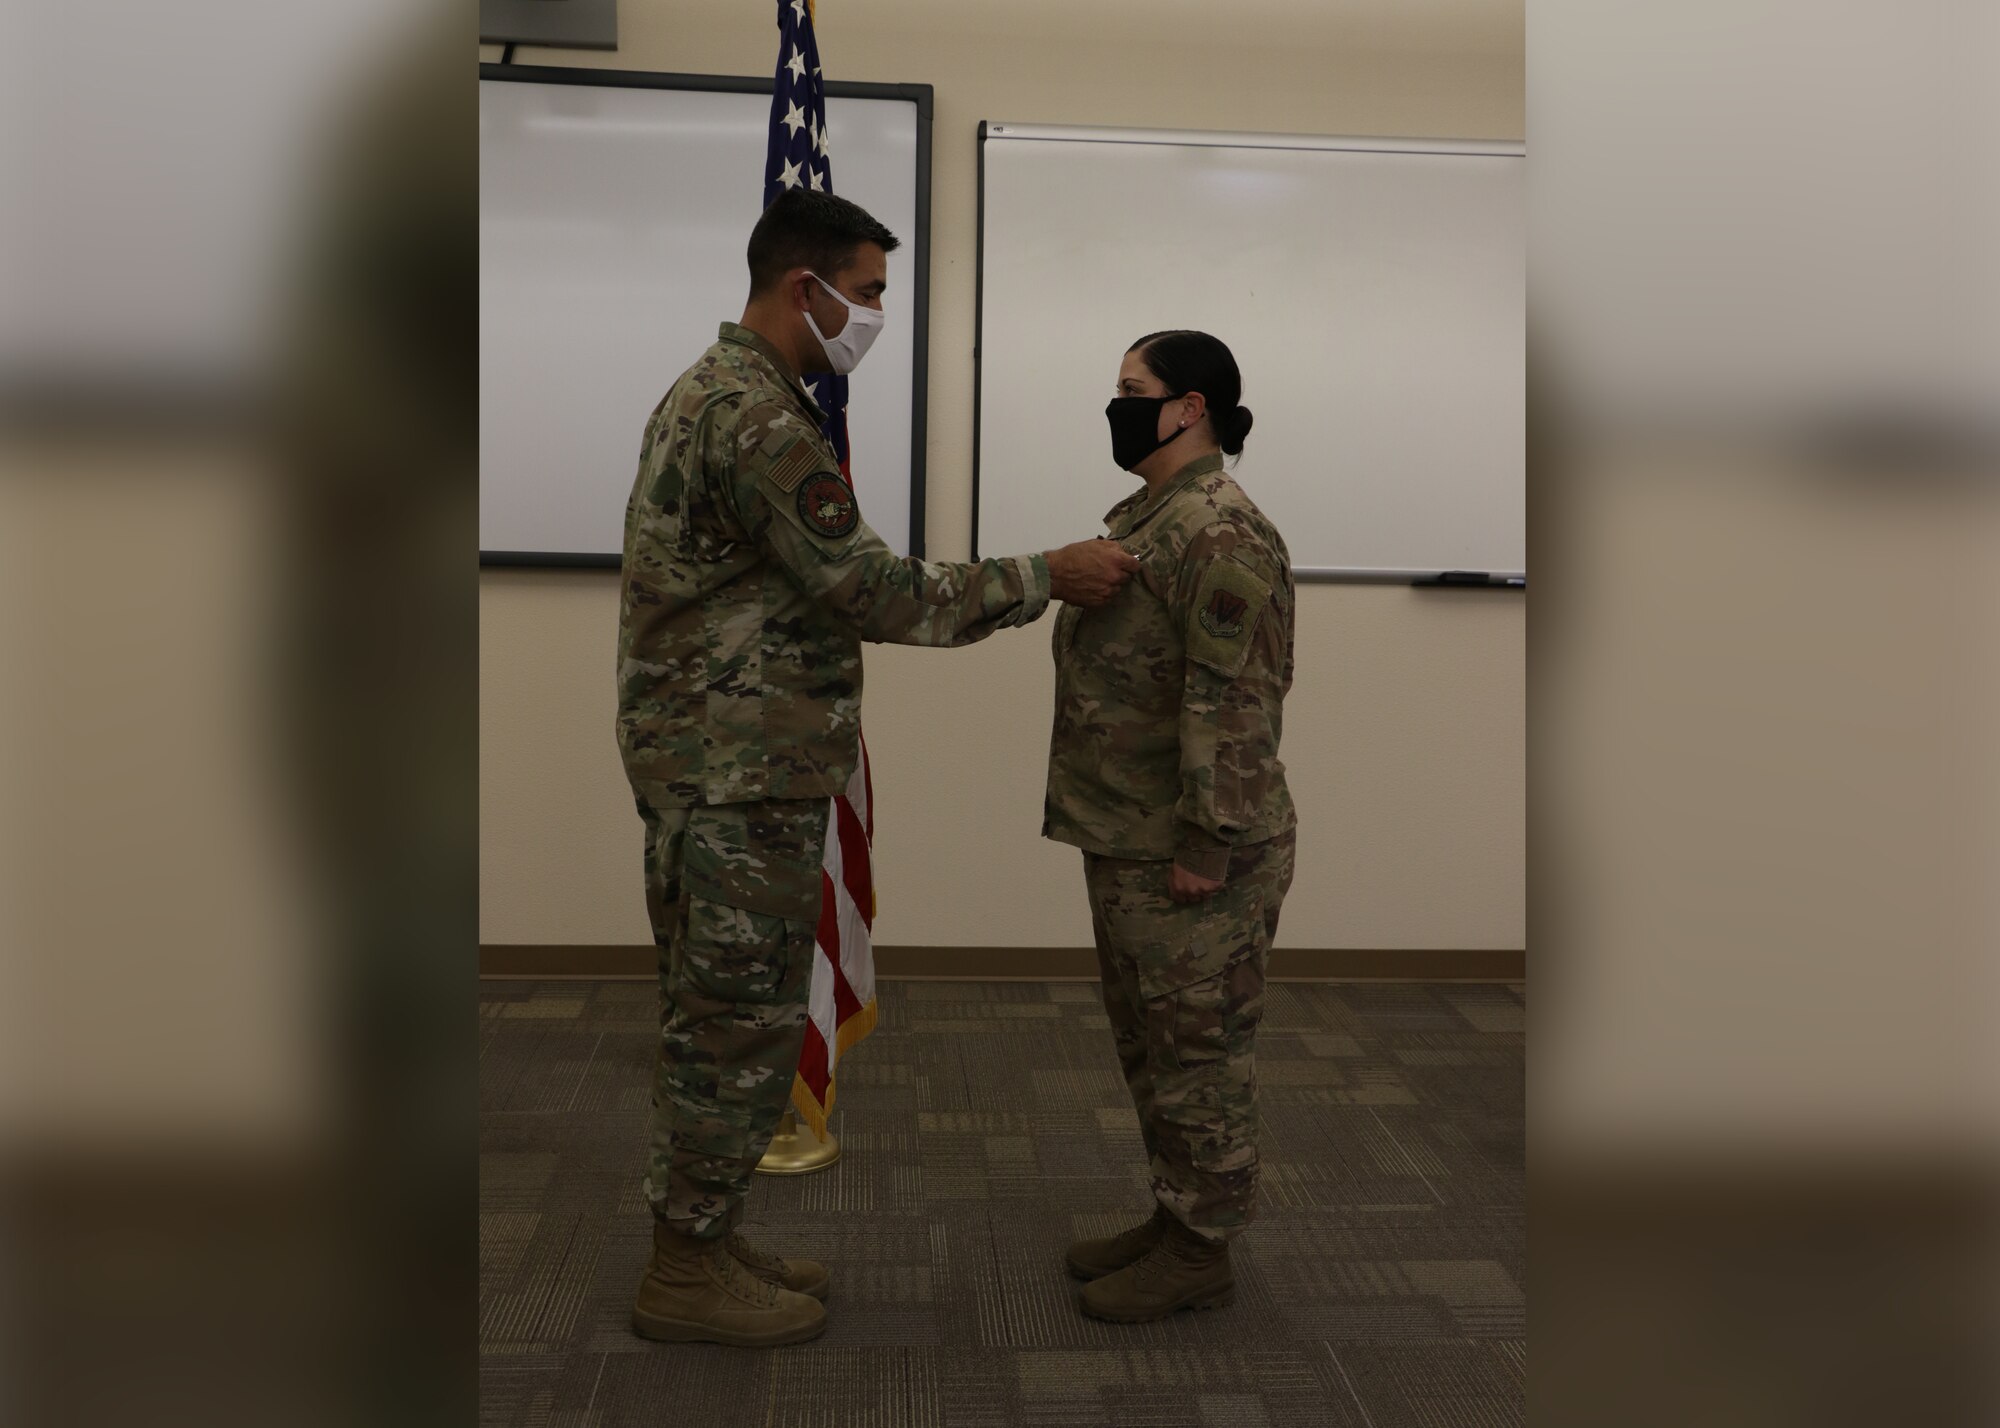 Col. Richard A. Goodman, 366th Fighter Wing commander, presents the Bronze Medal award to Capt. Kristen Miranda, 366th Force Support Squadron operations officer, August 20, 2020, at Mountain Home Air Force Base. Miranda served as the director of operations for the 405th Expeditionary Support Squadron at Bagram Airfield, Afghanistan, from April 2019 to April 2020. (U.S. Air Force Photo courtesy of Shelly Turner)